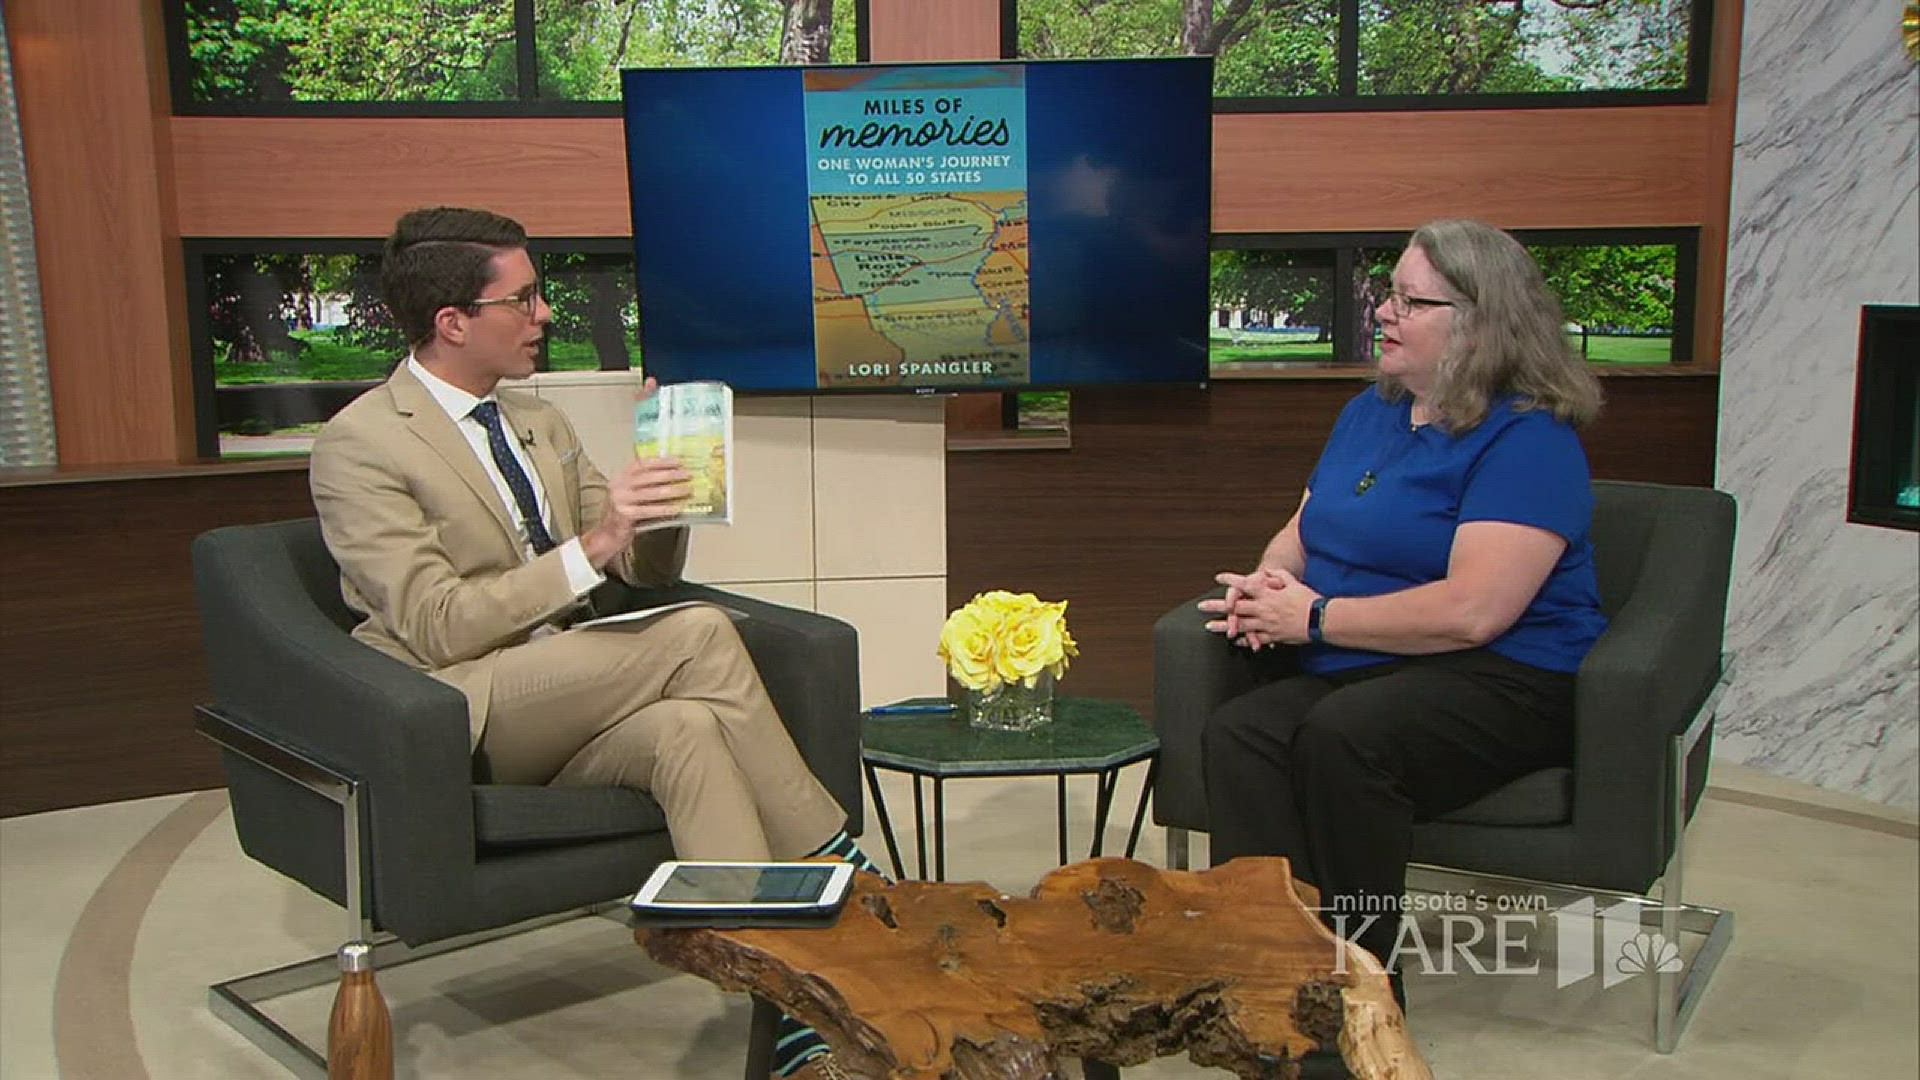 Lori Spangler has crossed the border of every state. Her debut book, Miles of Memories: One Woman's Journey to All 50 States, not only takes readers on a unique road trip, it validates that anyone can do anything they set their mind to. http://kare11.tv/2